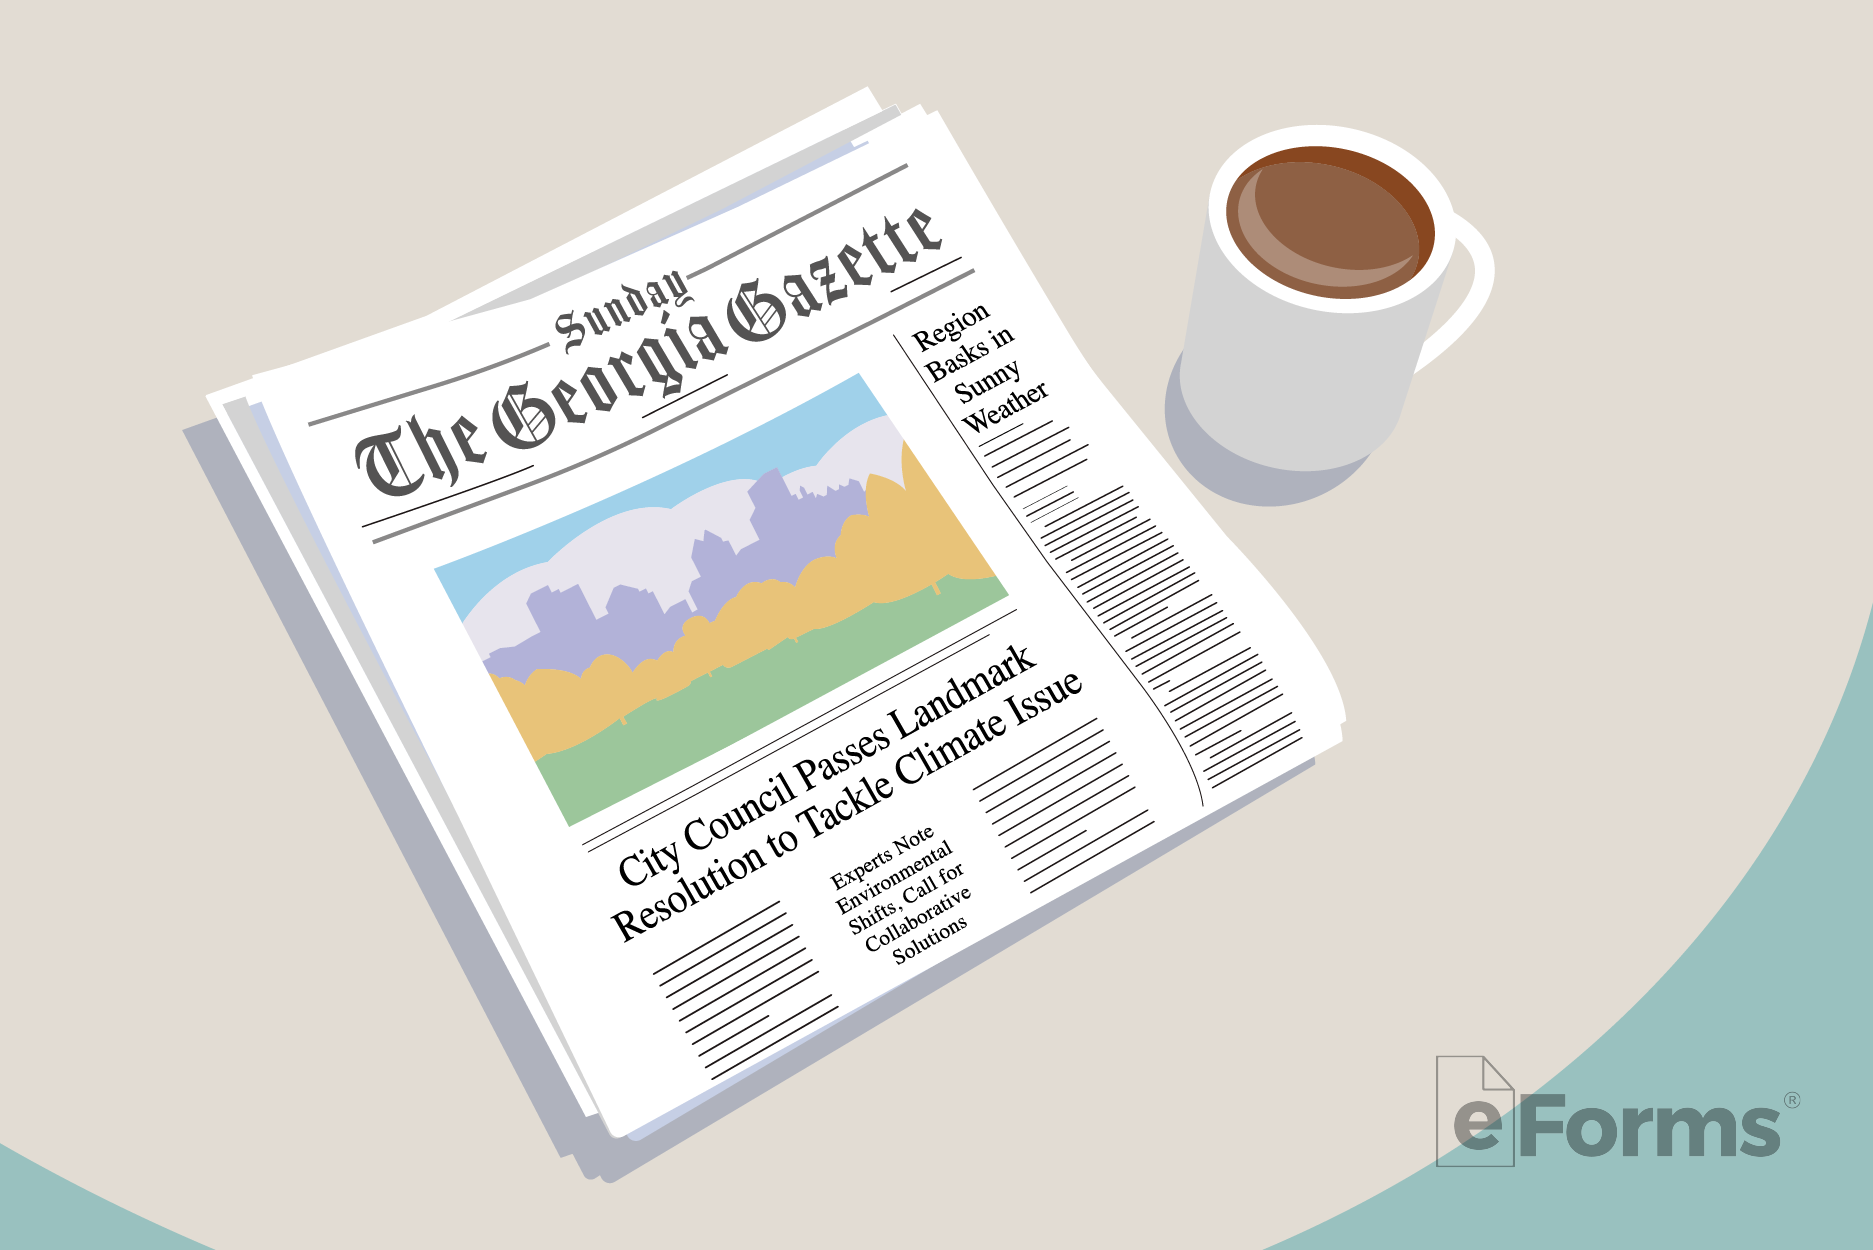 Georgia newspaper with cup of coffee.